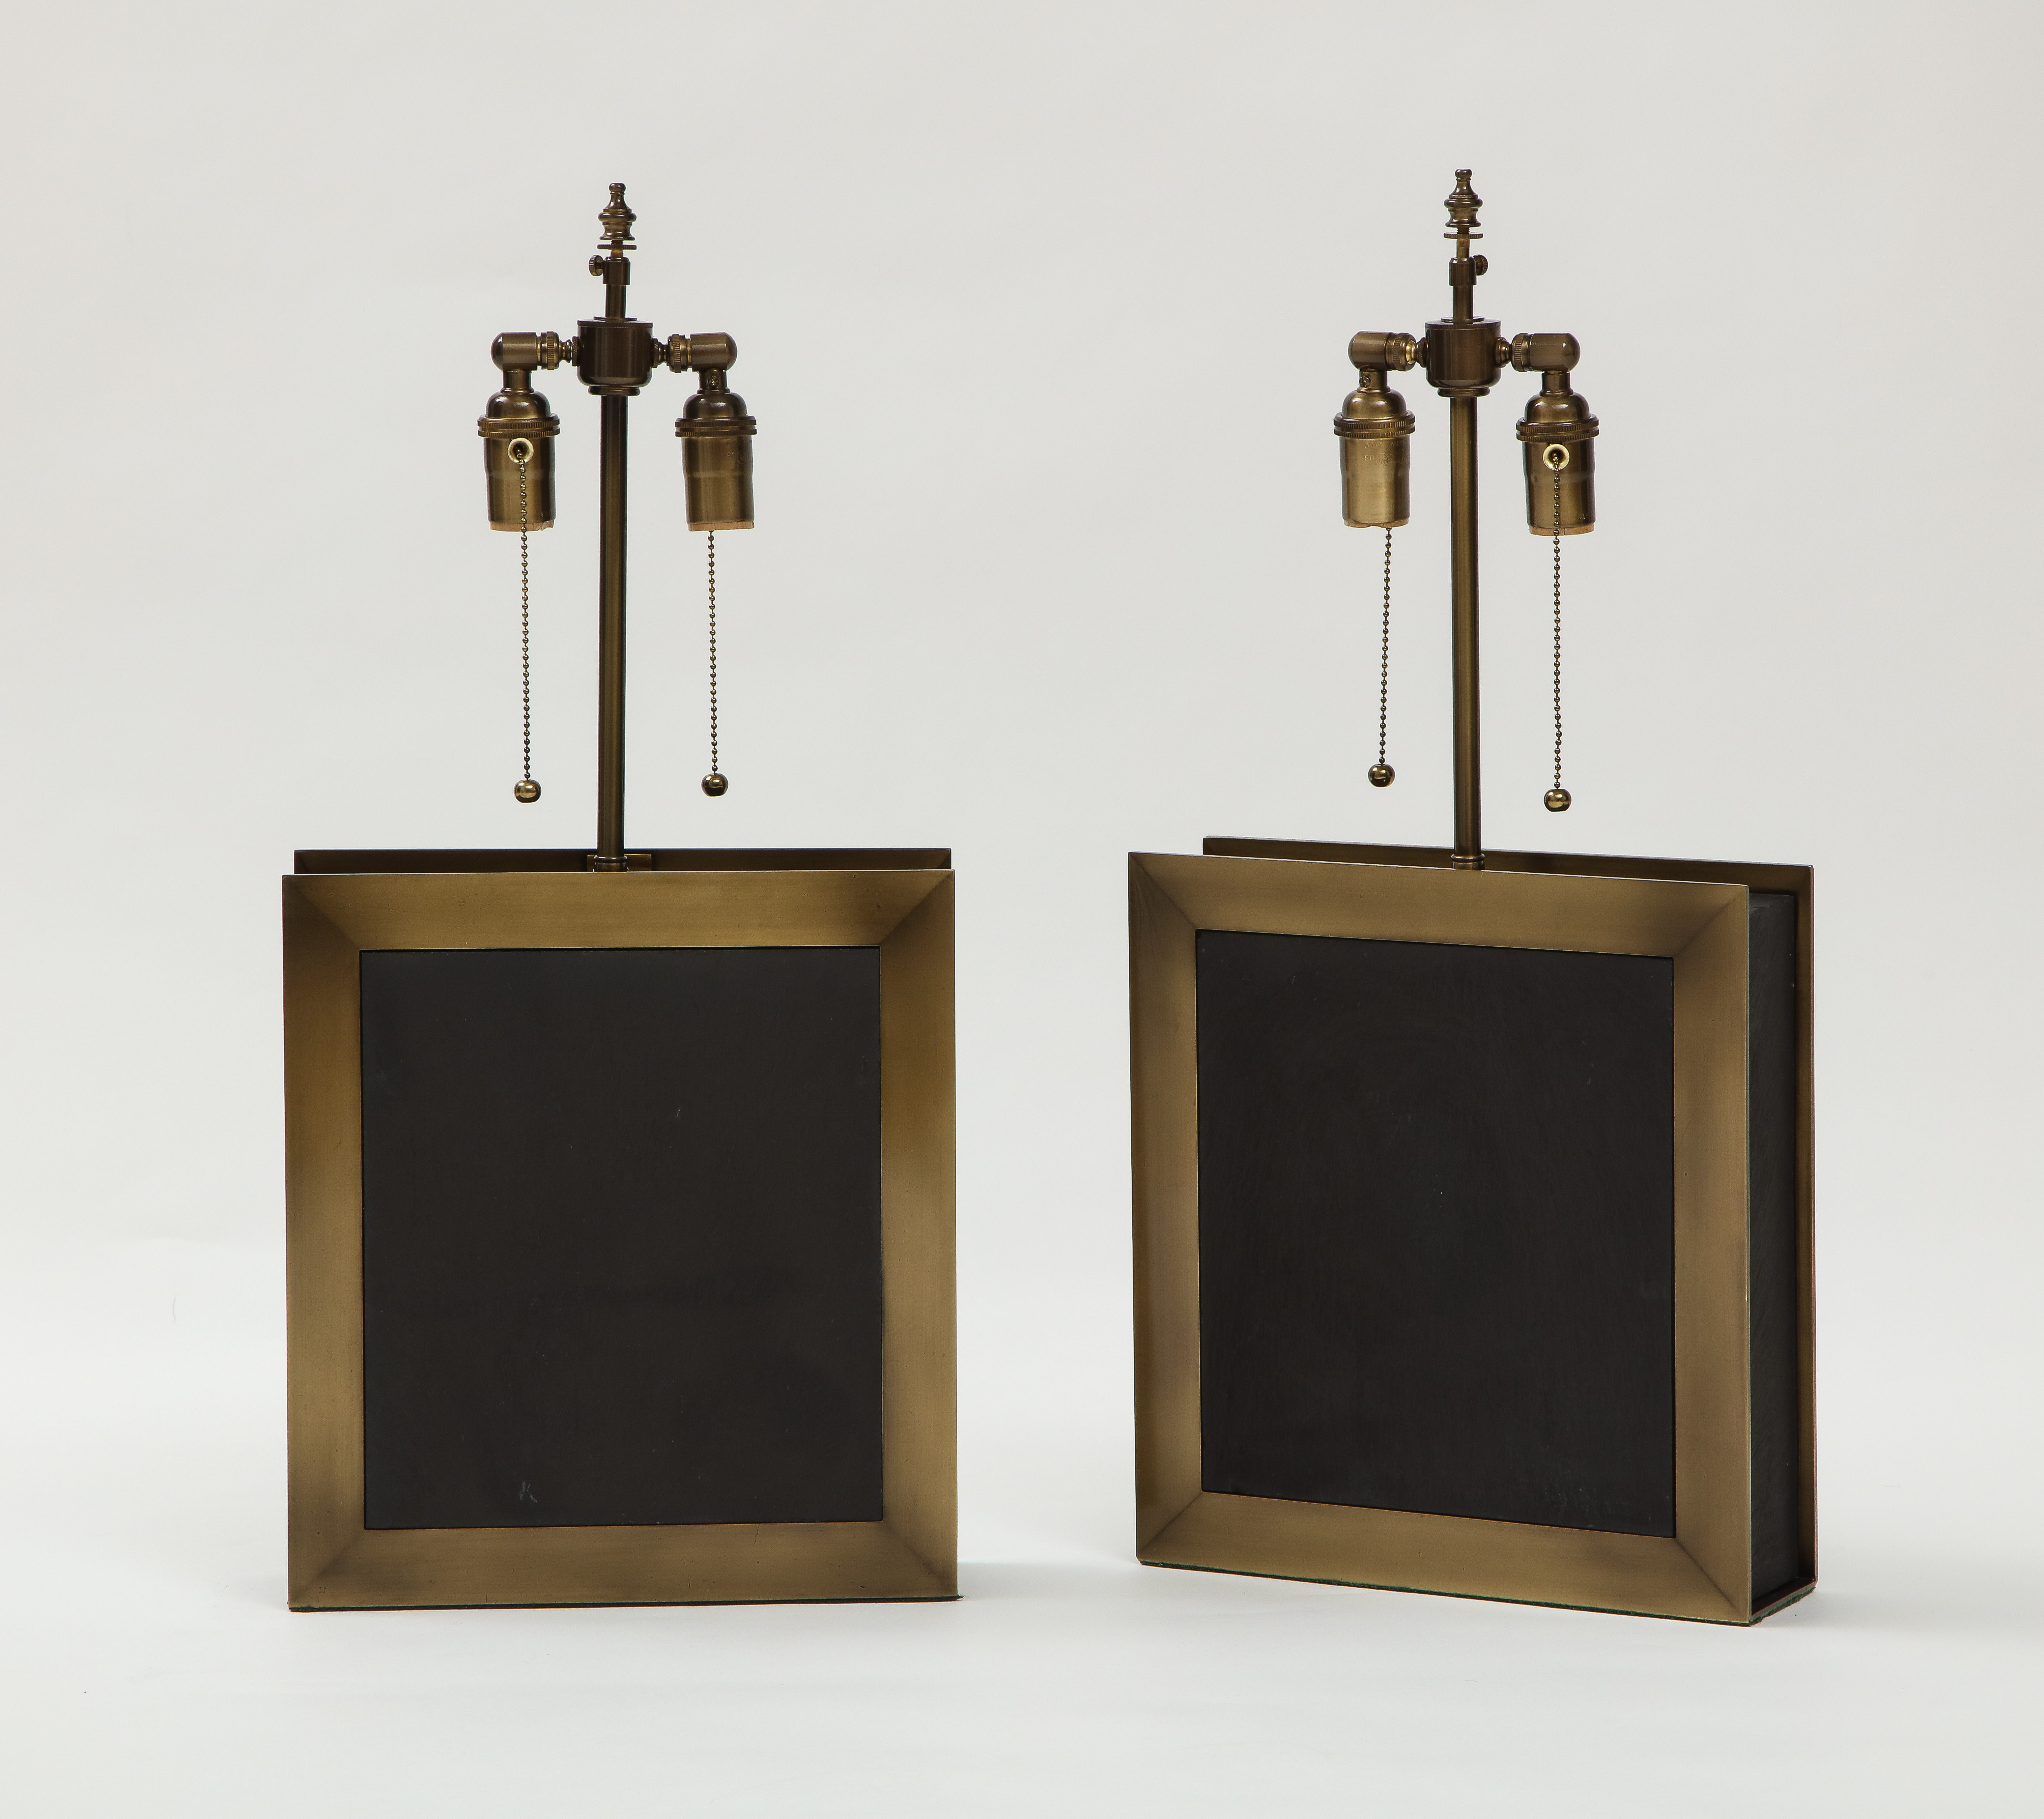 Pair of square shaped lamps